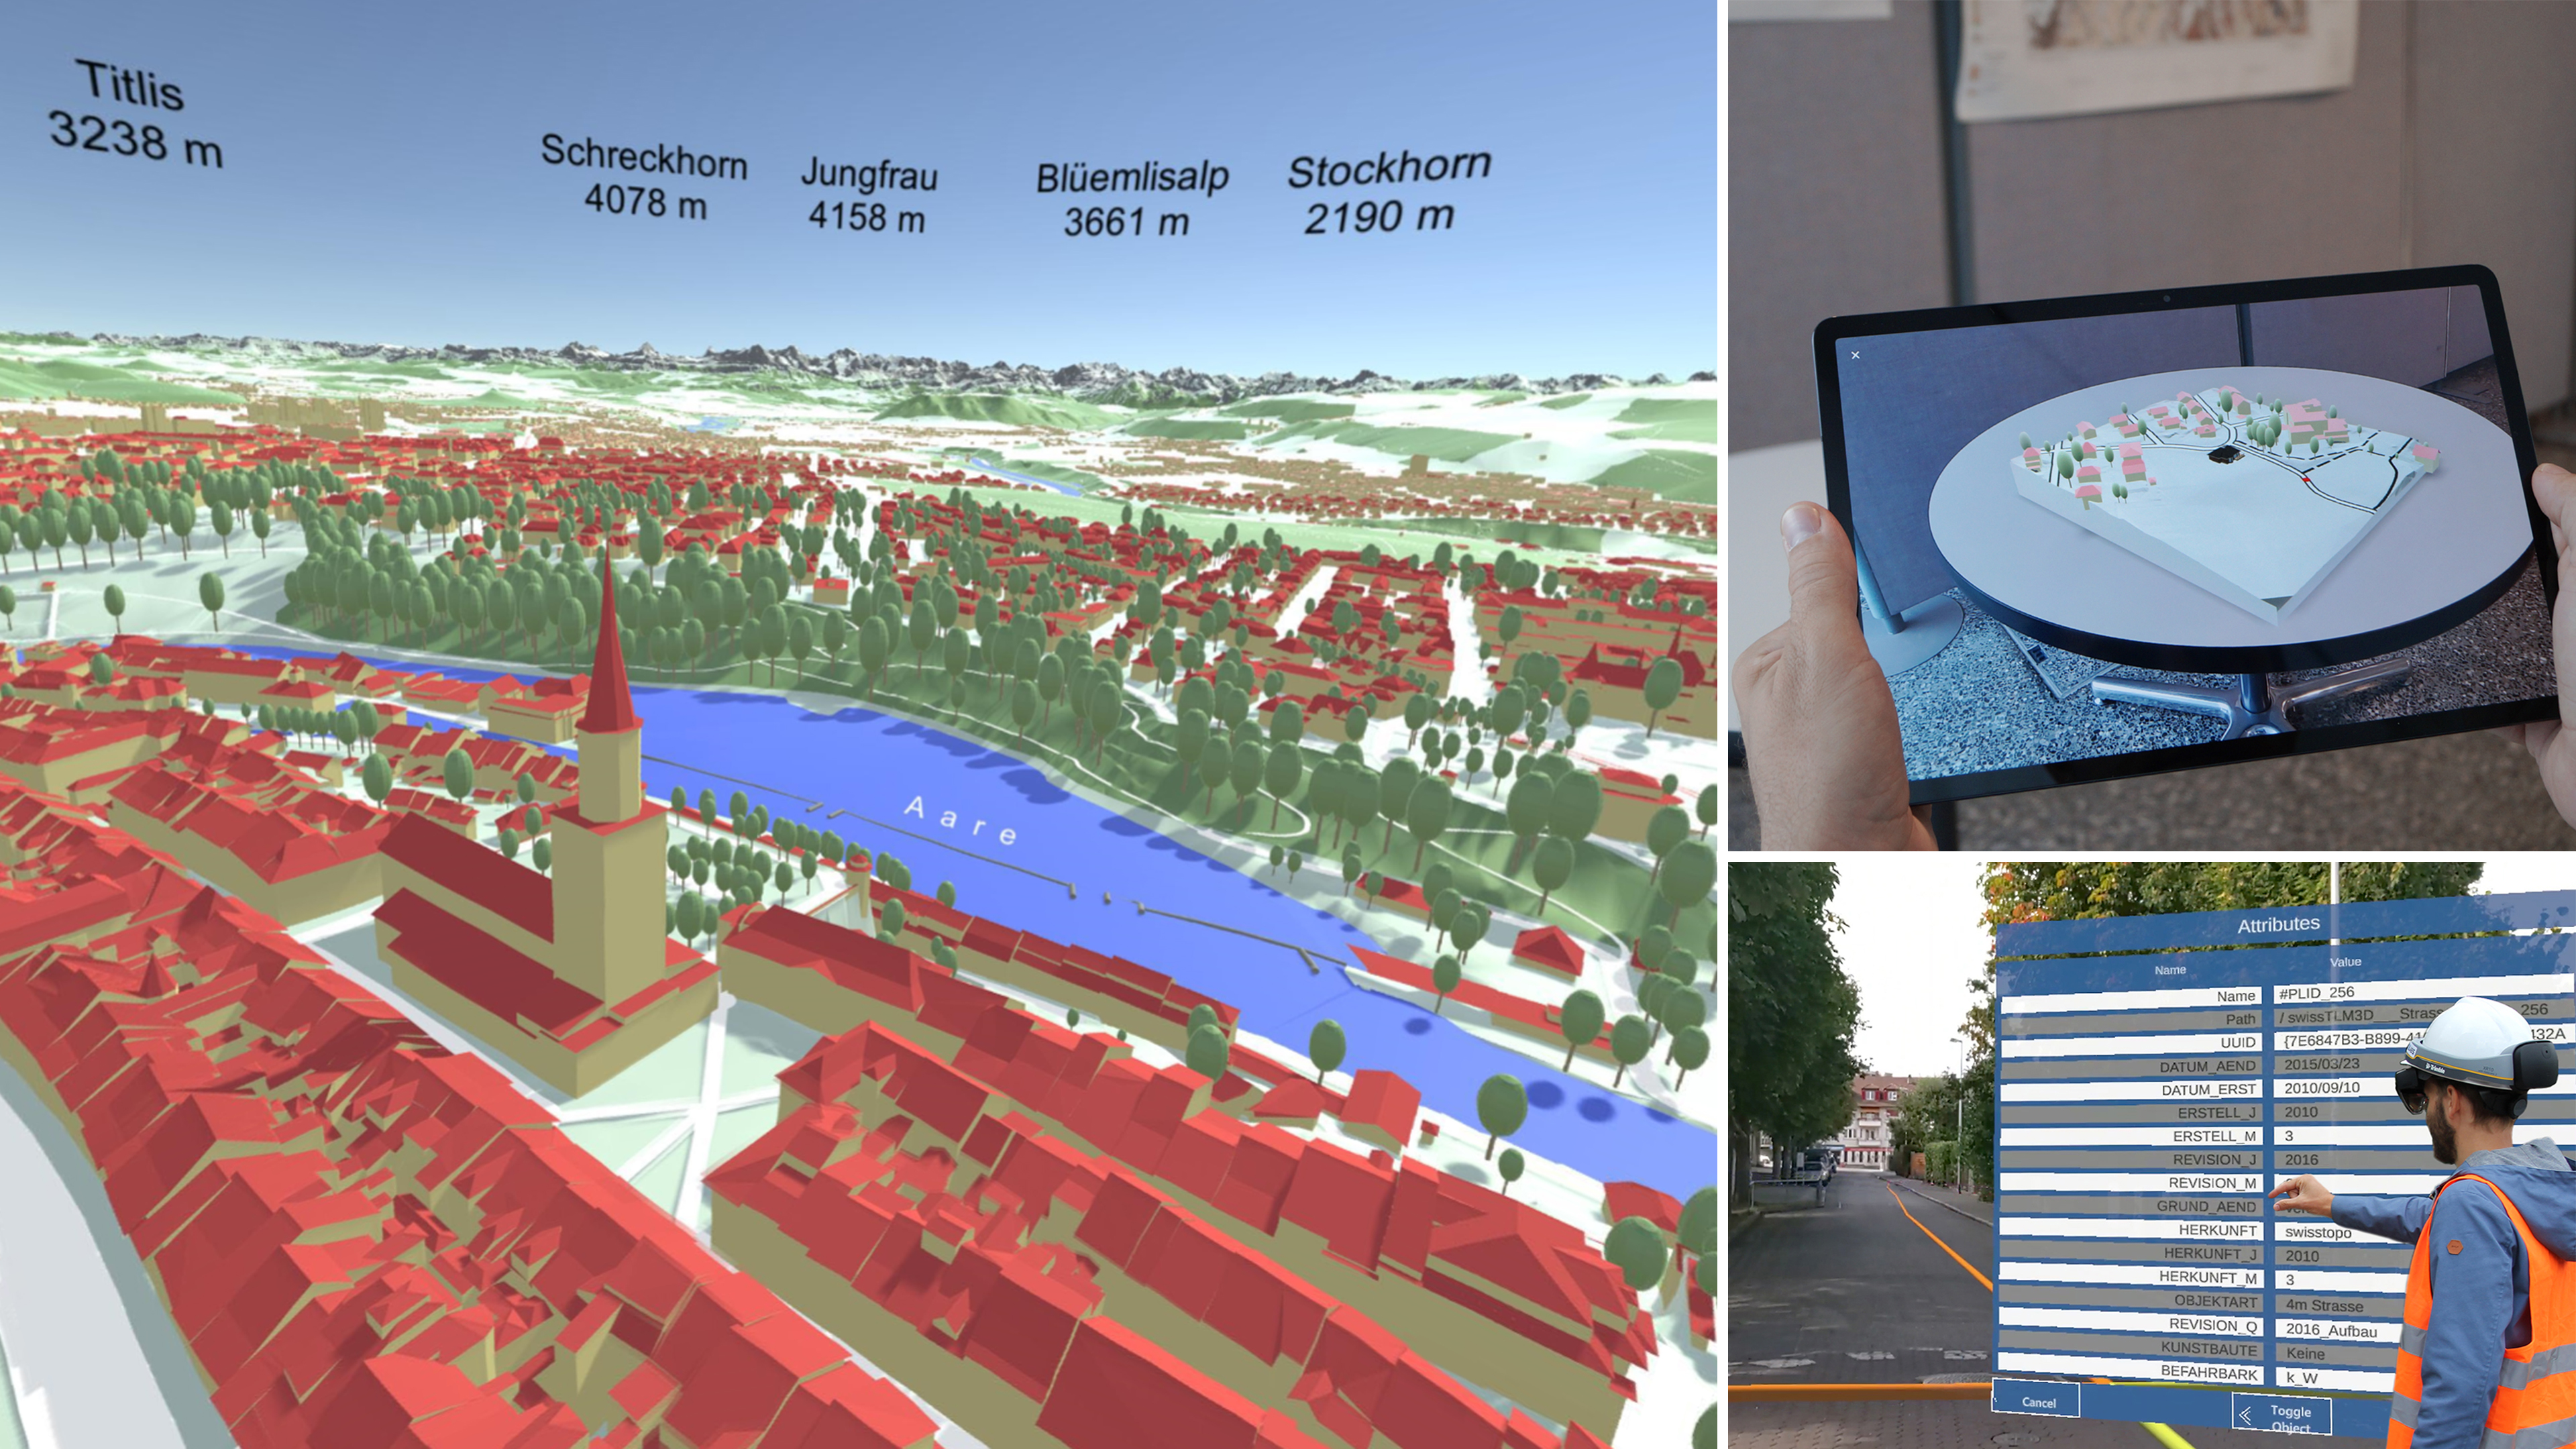 Composite image: The main image on the left shows Bern's old town with the cathedral and the Bernese Alps from a virtual bird's eye view. The two smaller images on the right: AR presentation of a building project and outdoor geometry overlay with attribute query.